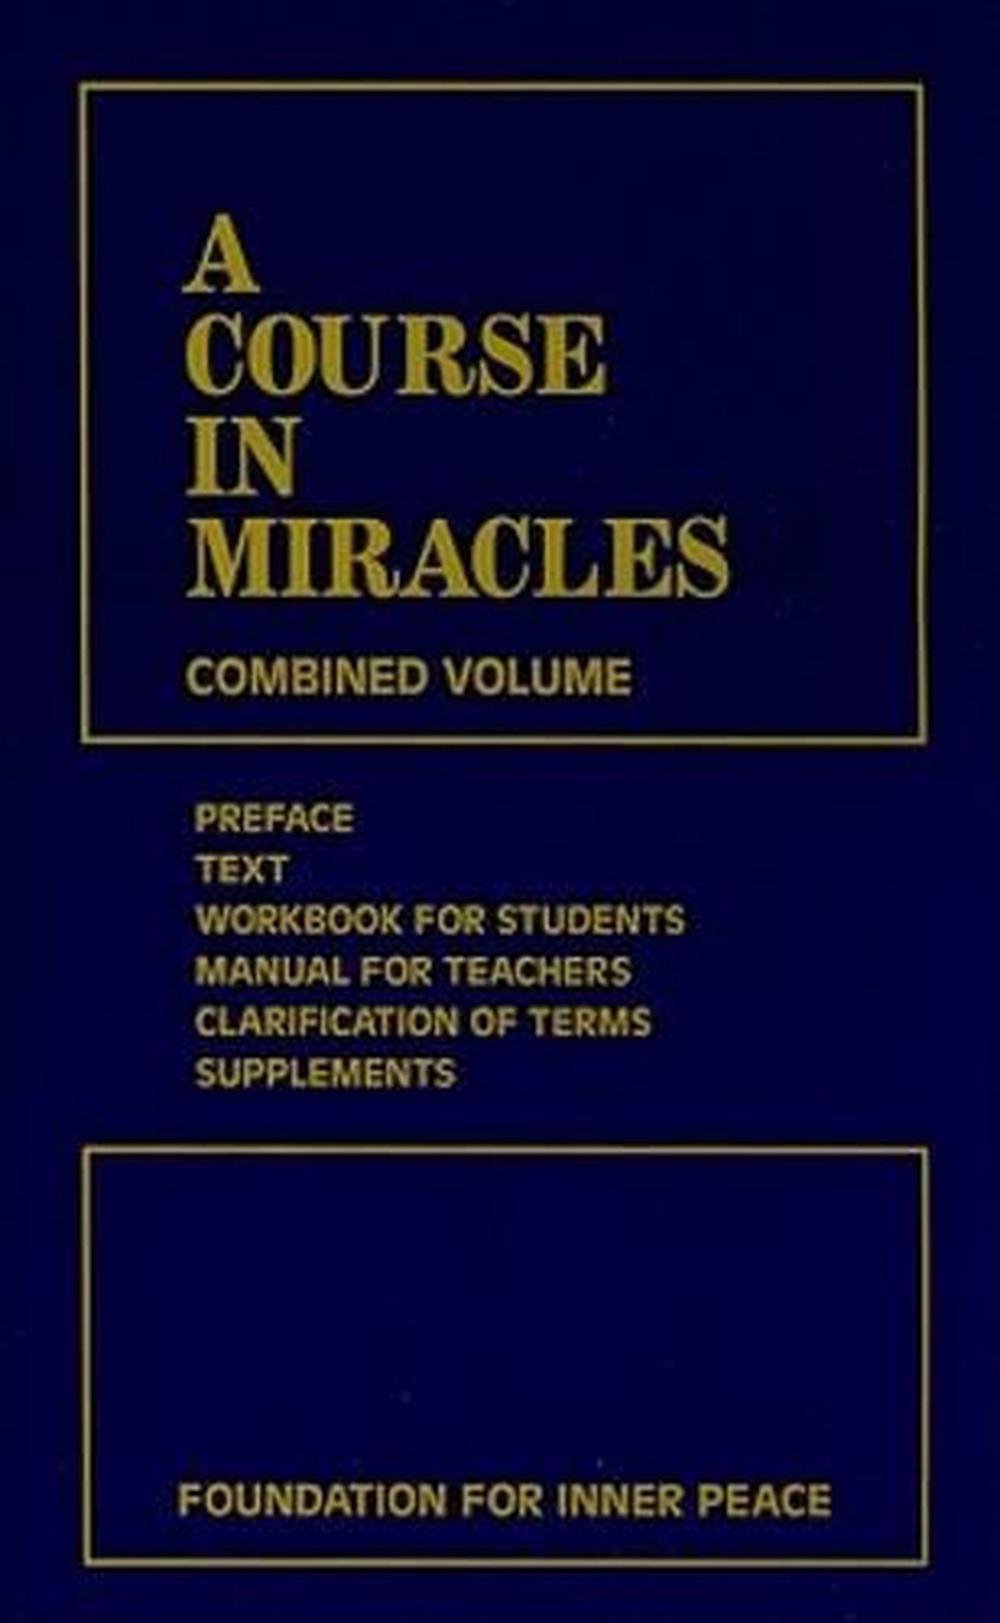 A Course in Miracles Combined Volume by Foundation For Inner Peace